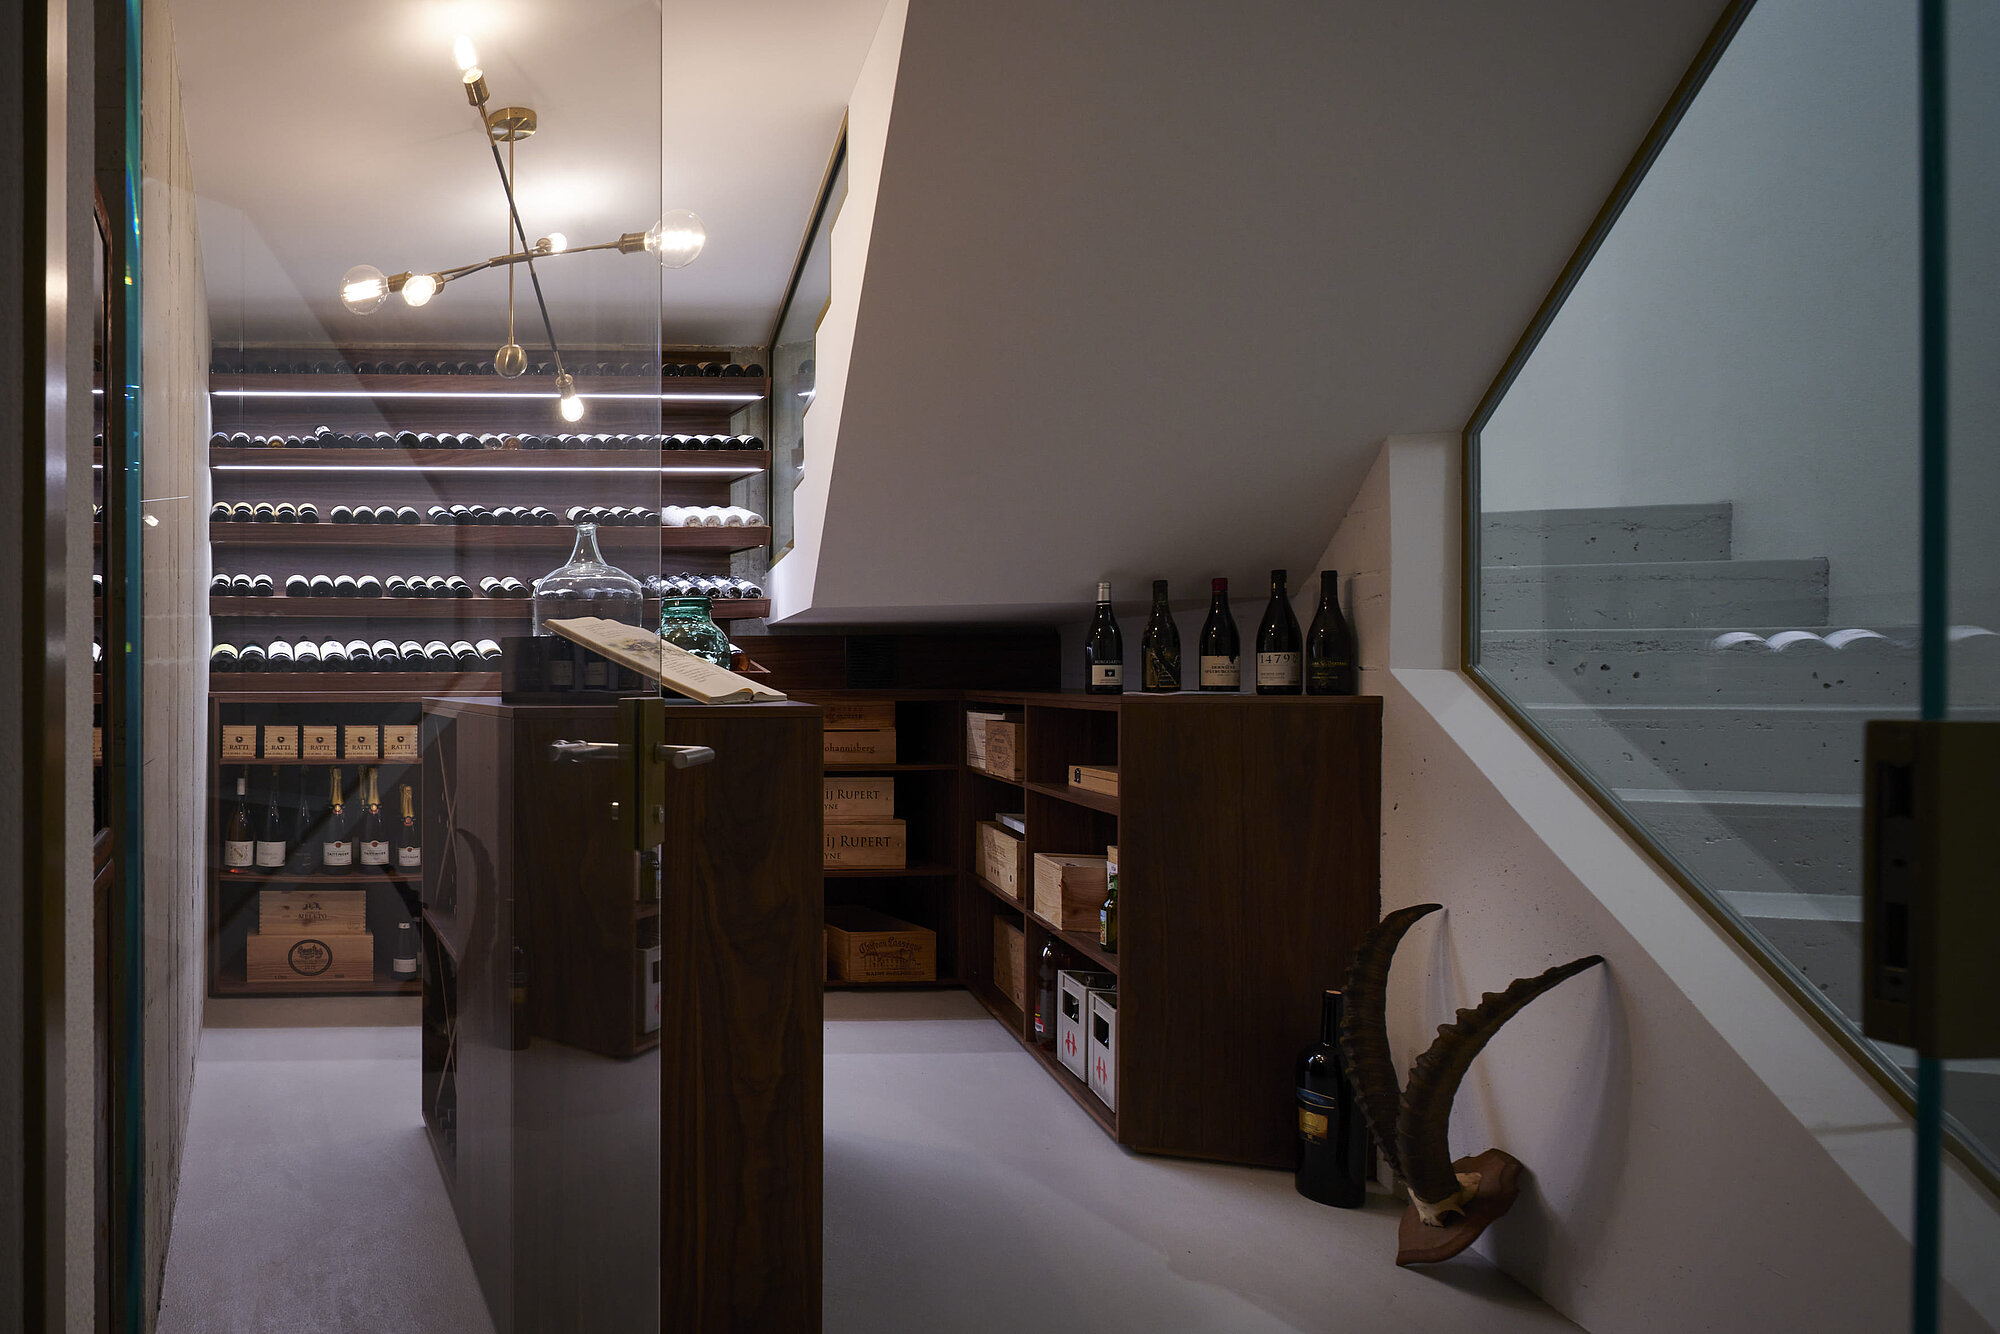 Interior view of the VILLA HECHT detached house, wine cellar